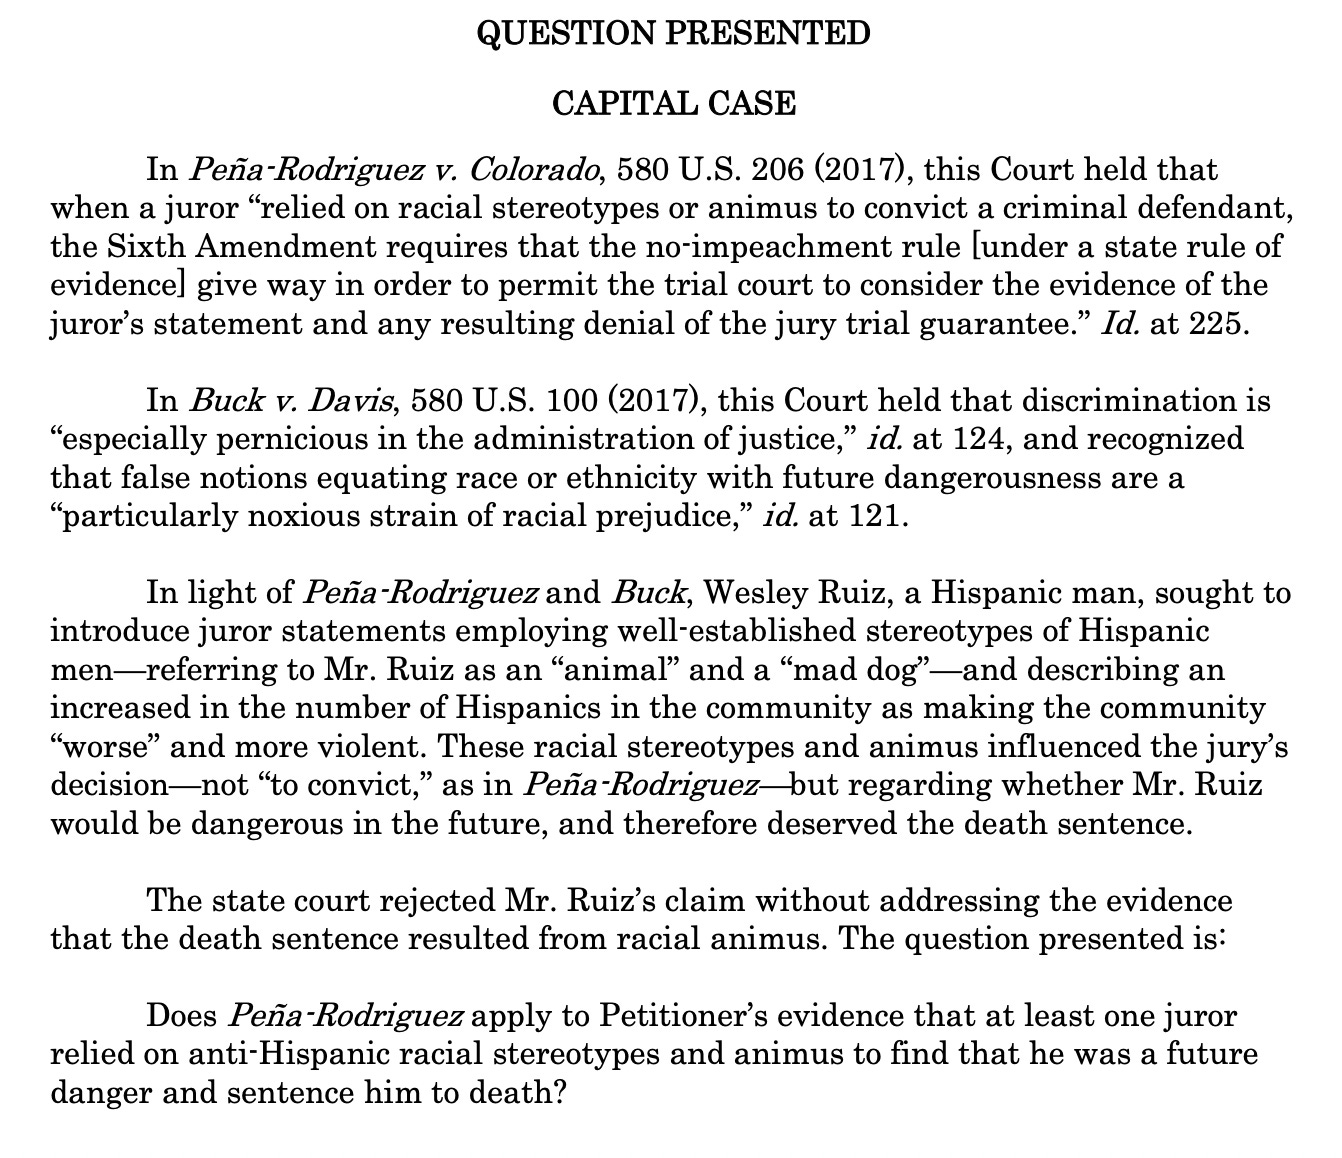 In light of Peña-Rodriguez and Buck, Wesley Ruiz, a Hispanic man, sought to introduce juror statements employing well-established stereotypes of Hispanic men—referring to Mr. Ruiz as an “animal” and a “mad dog”—and describing an increased in the number of Hispanics in the community as making the community “worse” and more violent. These racial stereotypes and animus influenced the jury’s decision—not “to convict,” as in Peña-Rodriguez—but regarding whether Mr. Ruiz would be dangerous in the future, and therefore deserved the death sentence. The state court rejected Mr. Ruiz’s claim without addressing the evidence that the death sentence resulted from racial animus. The question presented is: Does Peña-Rodriguez apply to Petitioner’s evidence that at least one juror relied on anti-Hispanic racial stereotypes and animus to find that he was a future danger and sentence him to death?